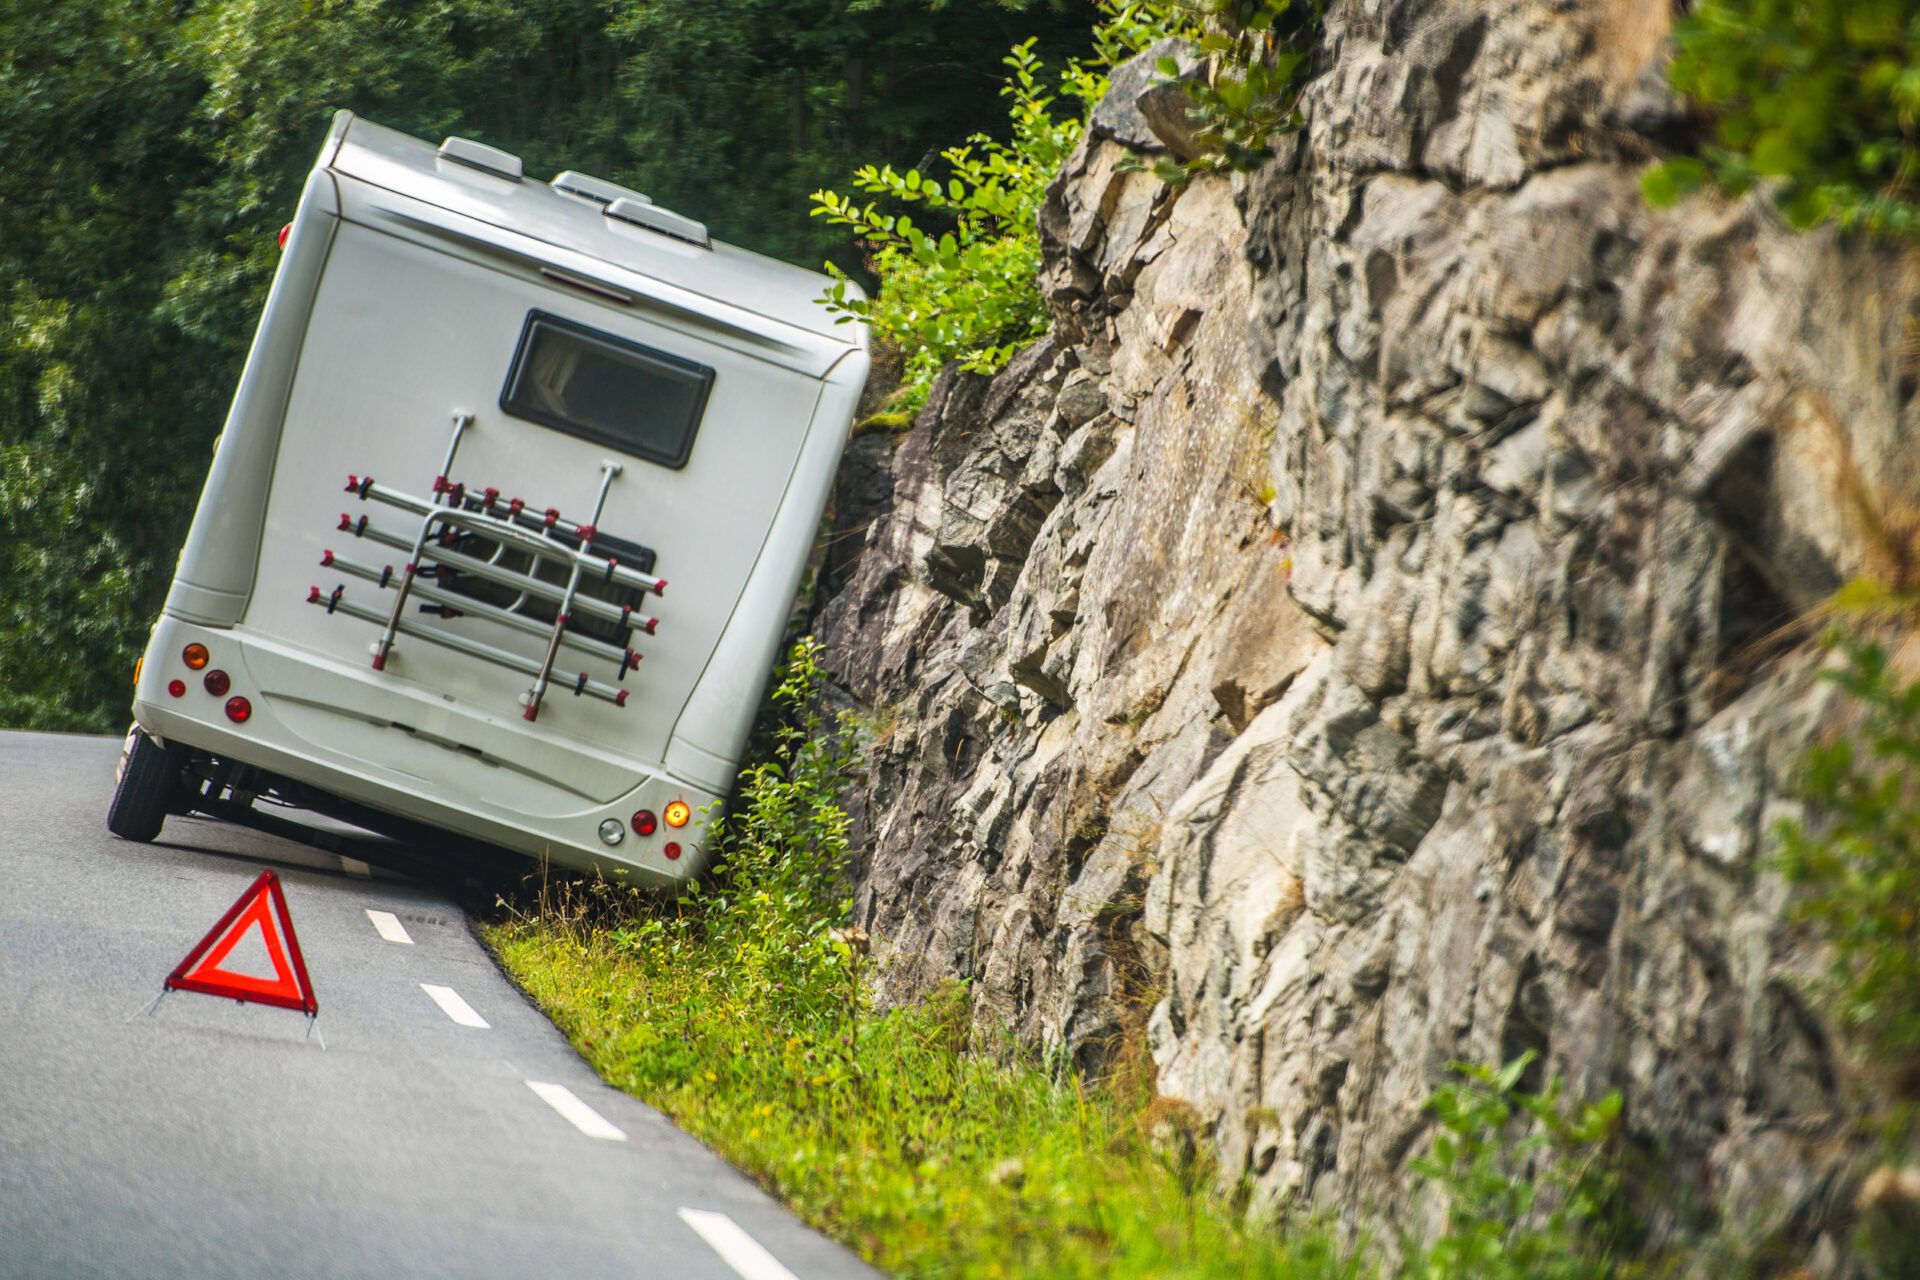 RV Camper Van Accident on the Winding Mountain Road